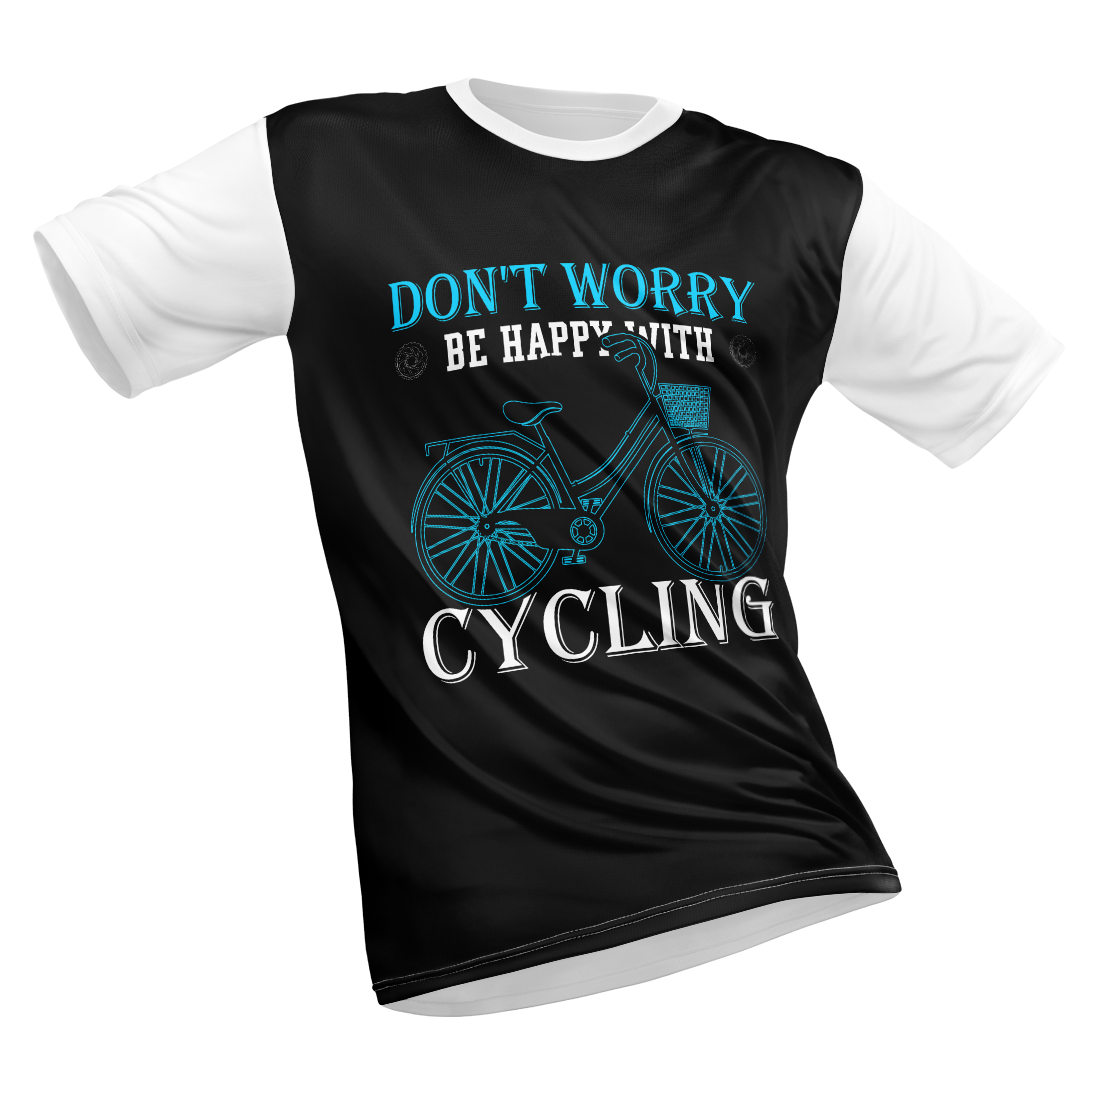 Polyester Half Sleeve T-Shirt with Round Collar and All Over Digital Print.